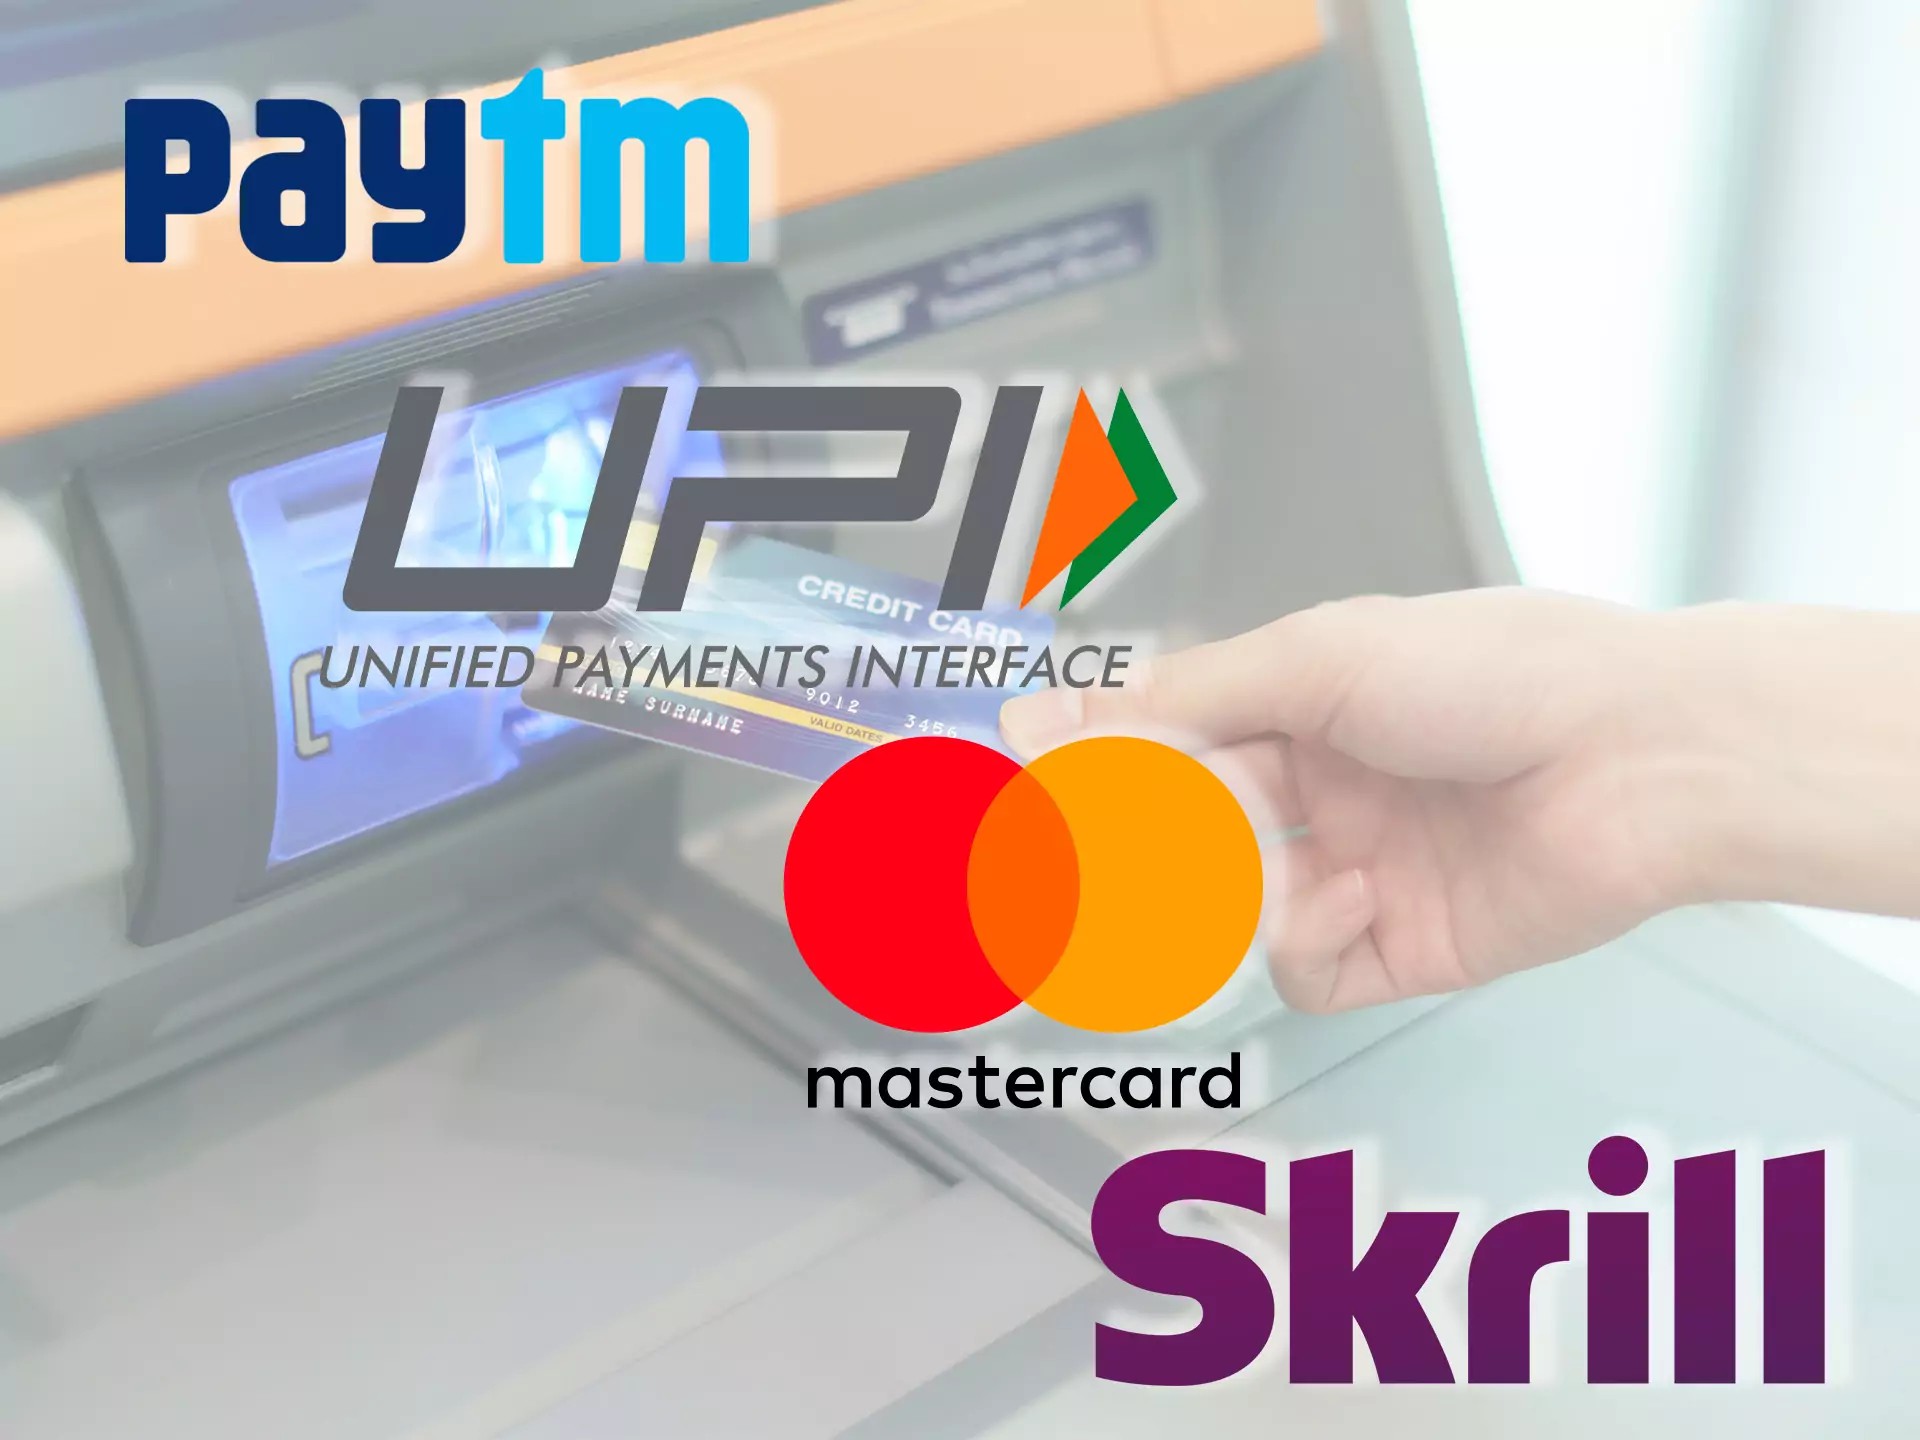 You can withdraw your winnings with popular and convenient methods, such as Paytm, UPI, Skrill and others.